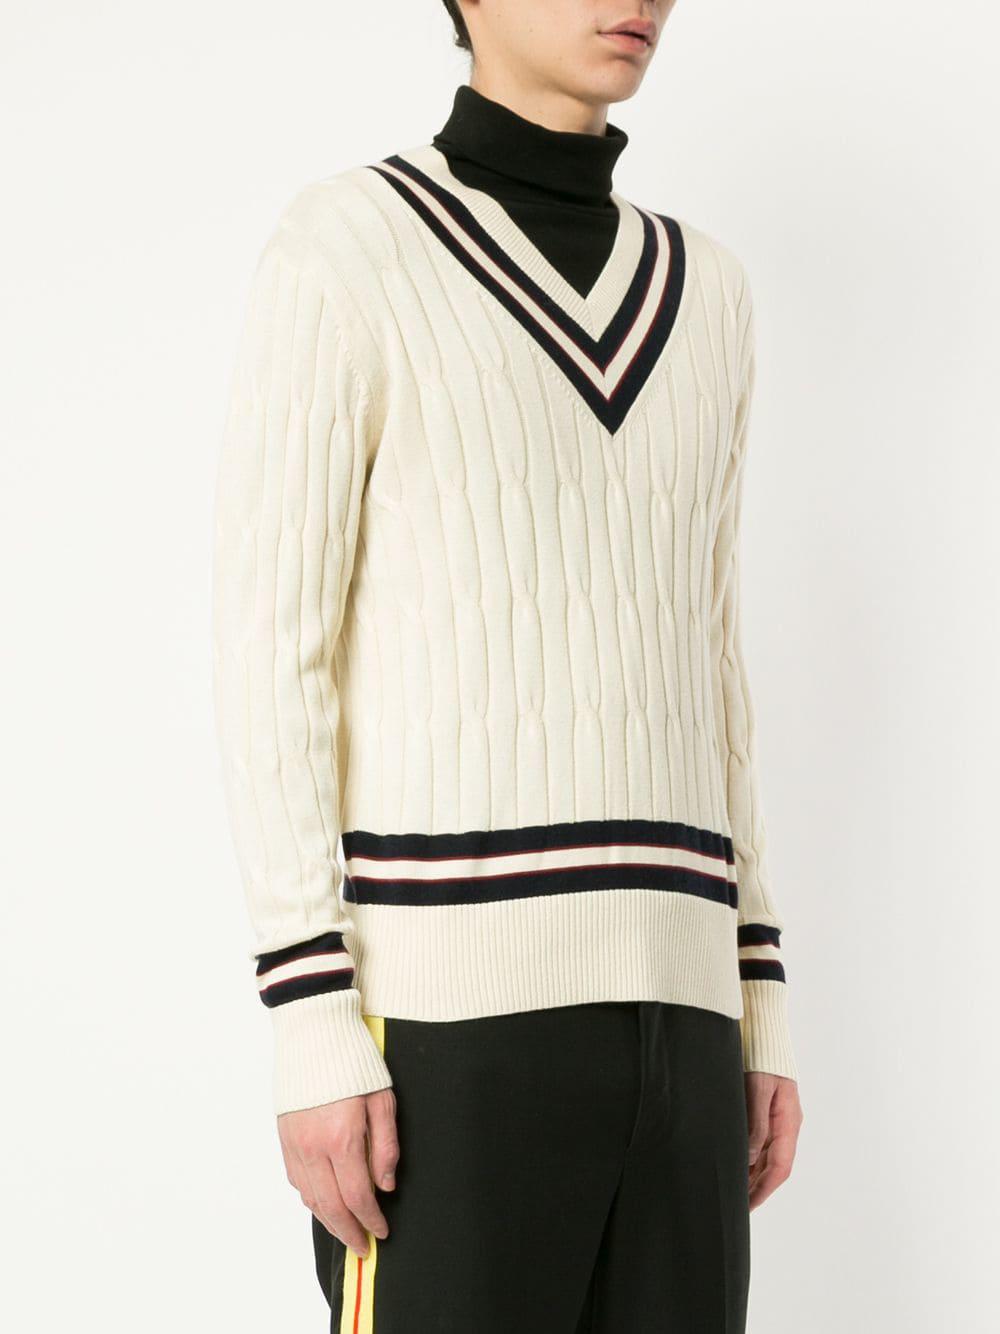 Kent & Curwen Cashmere V-neck Cable Knit Sweater in White for Men - Lyst